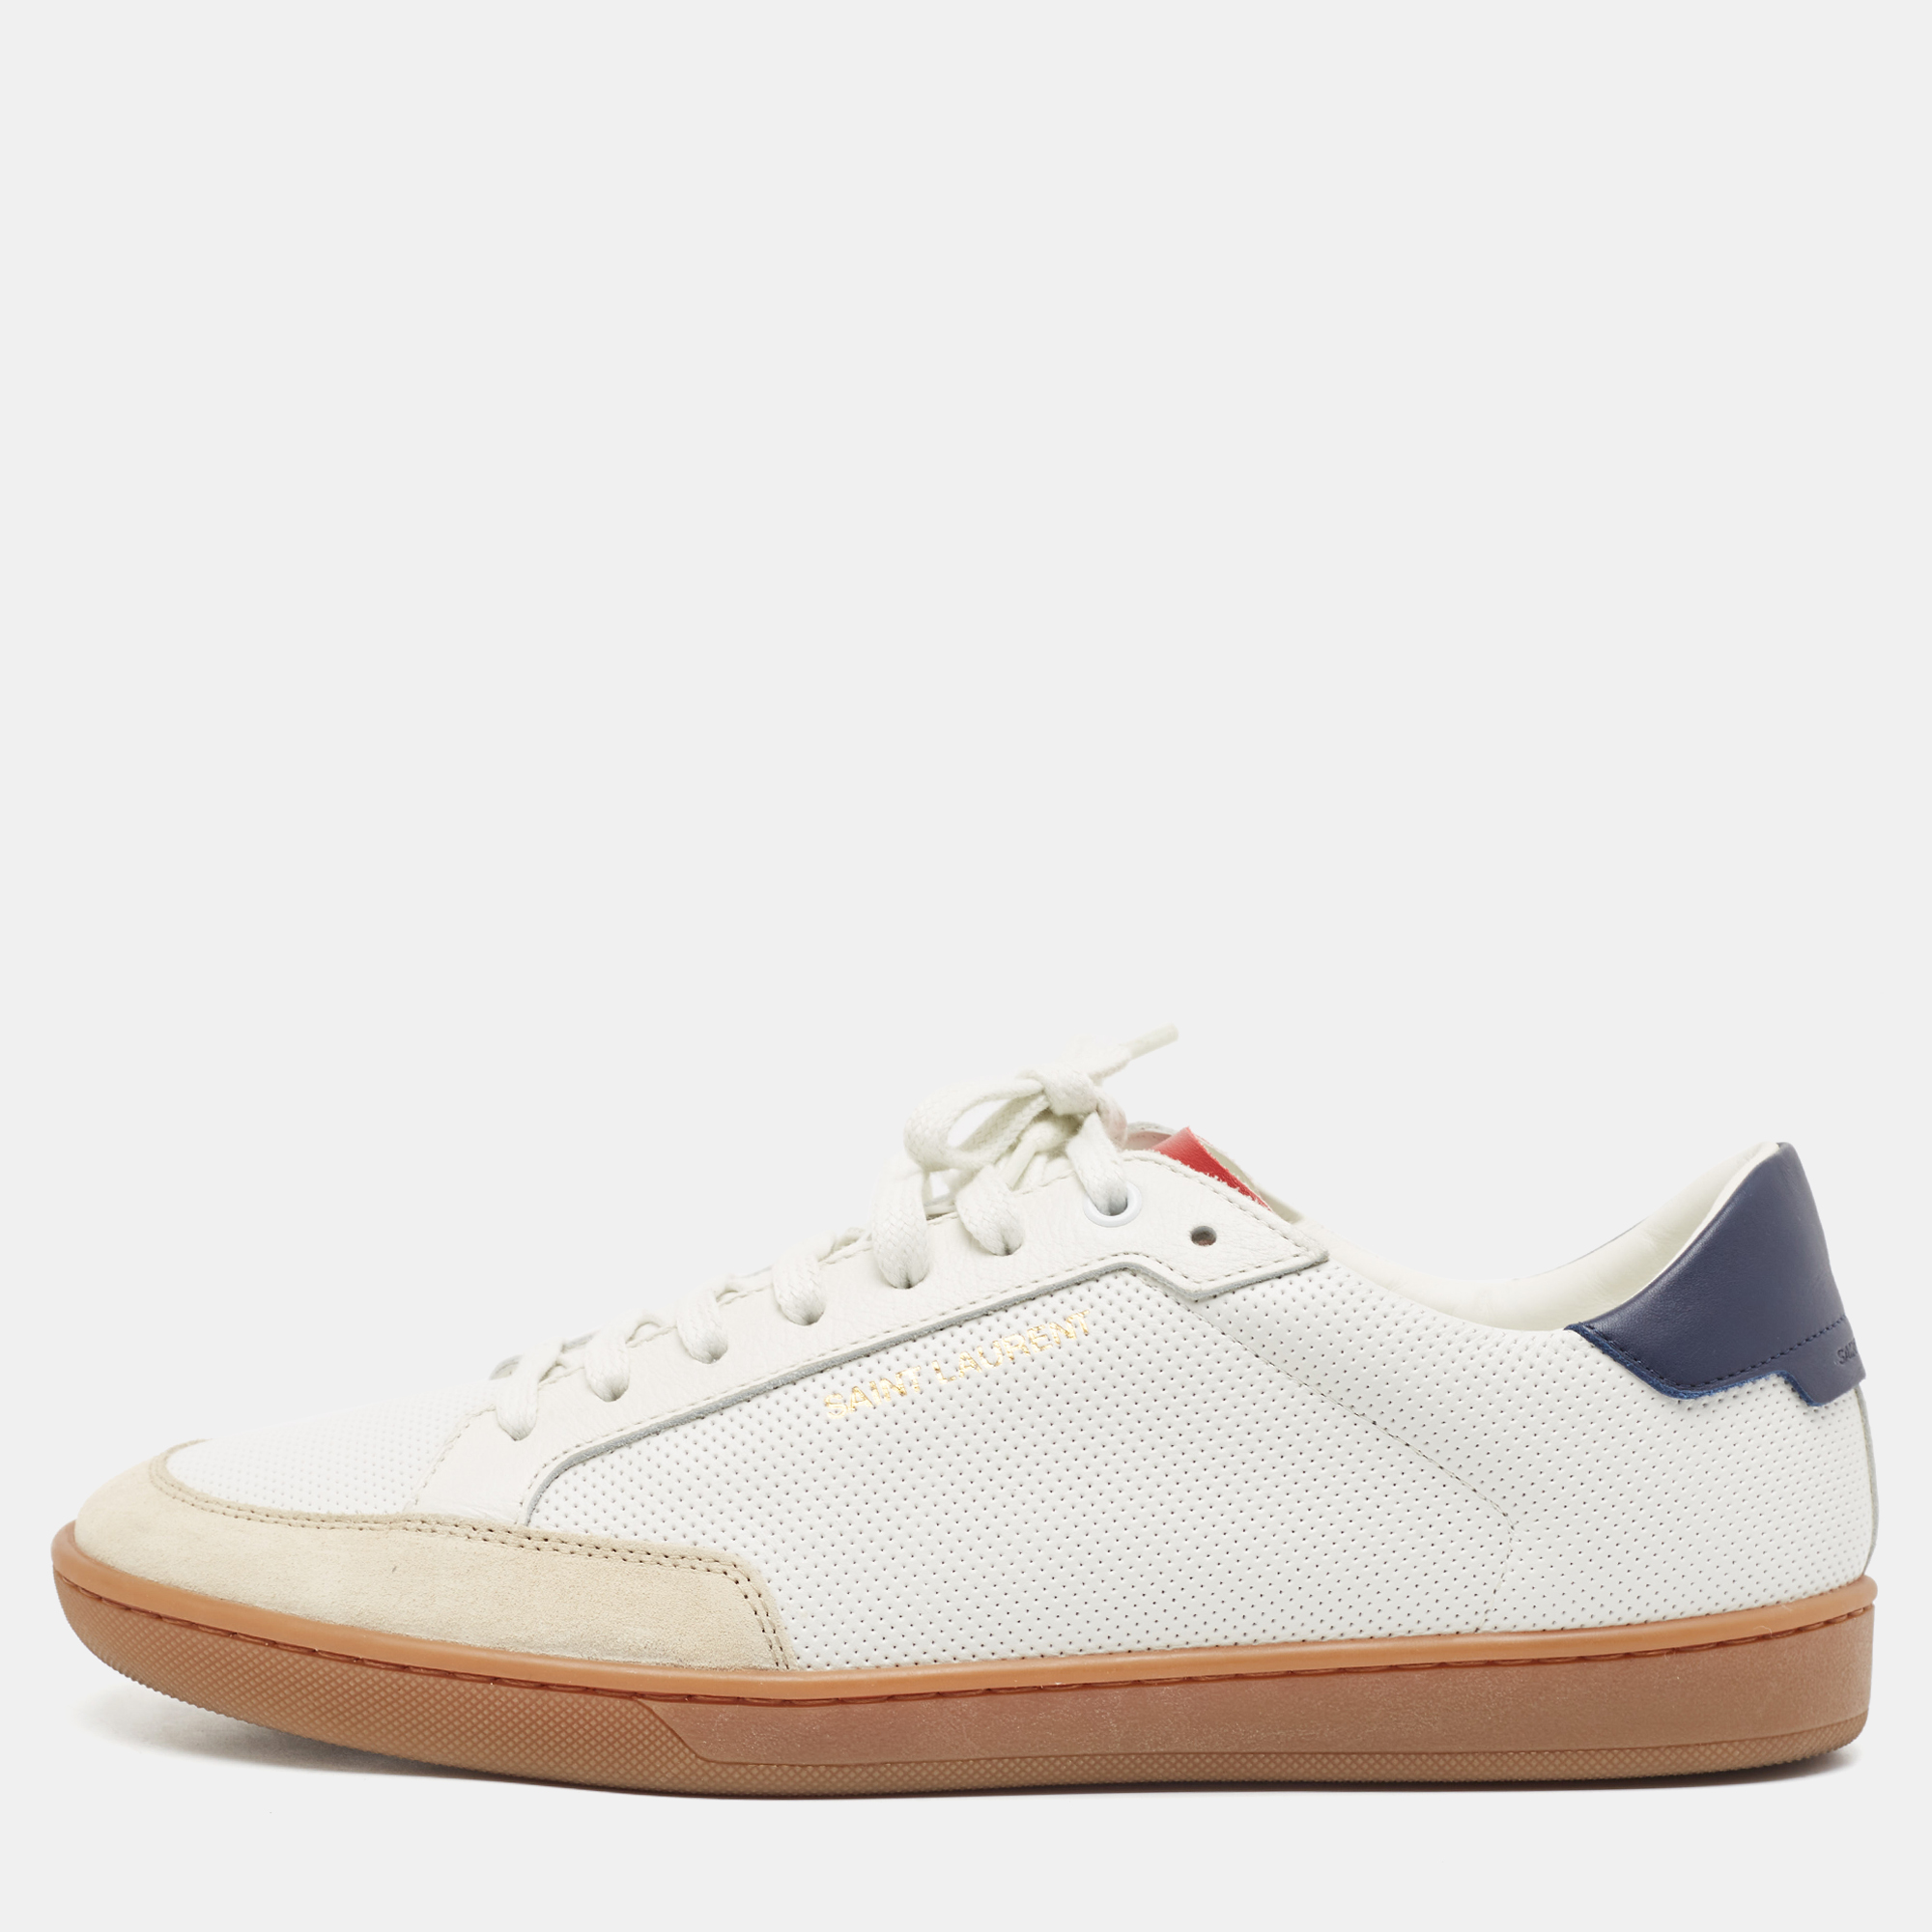 

Saint Laurent Multicolor Perforated Leather and Suede Court Classic SL/10 Sneakers Size